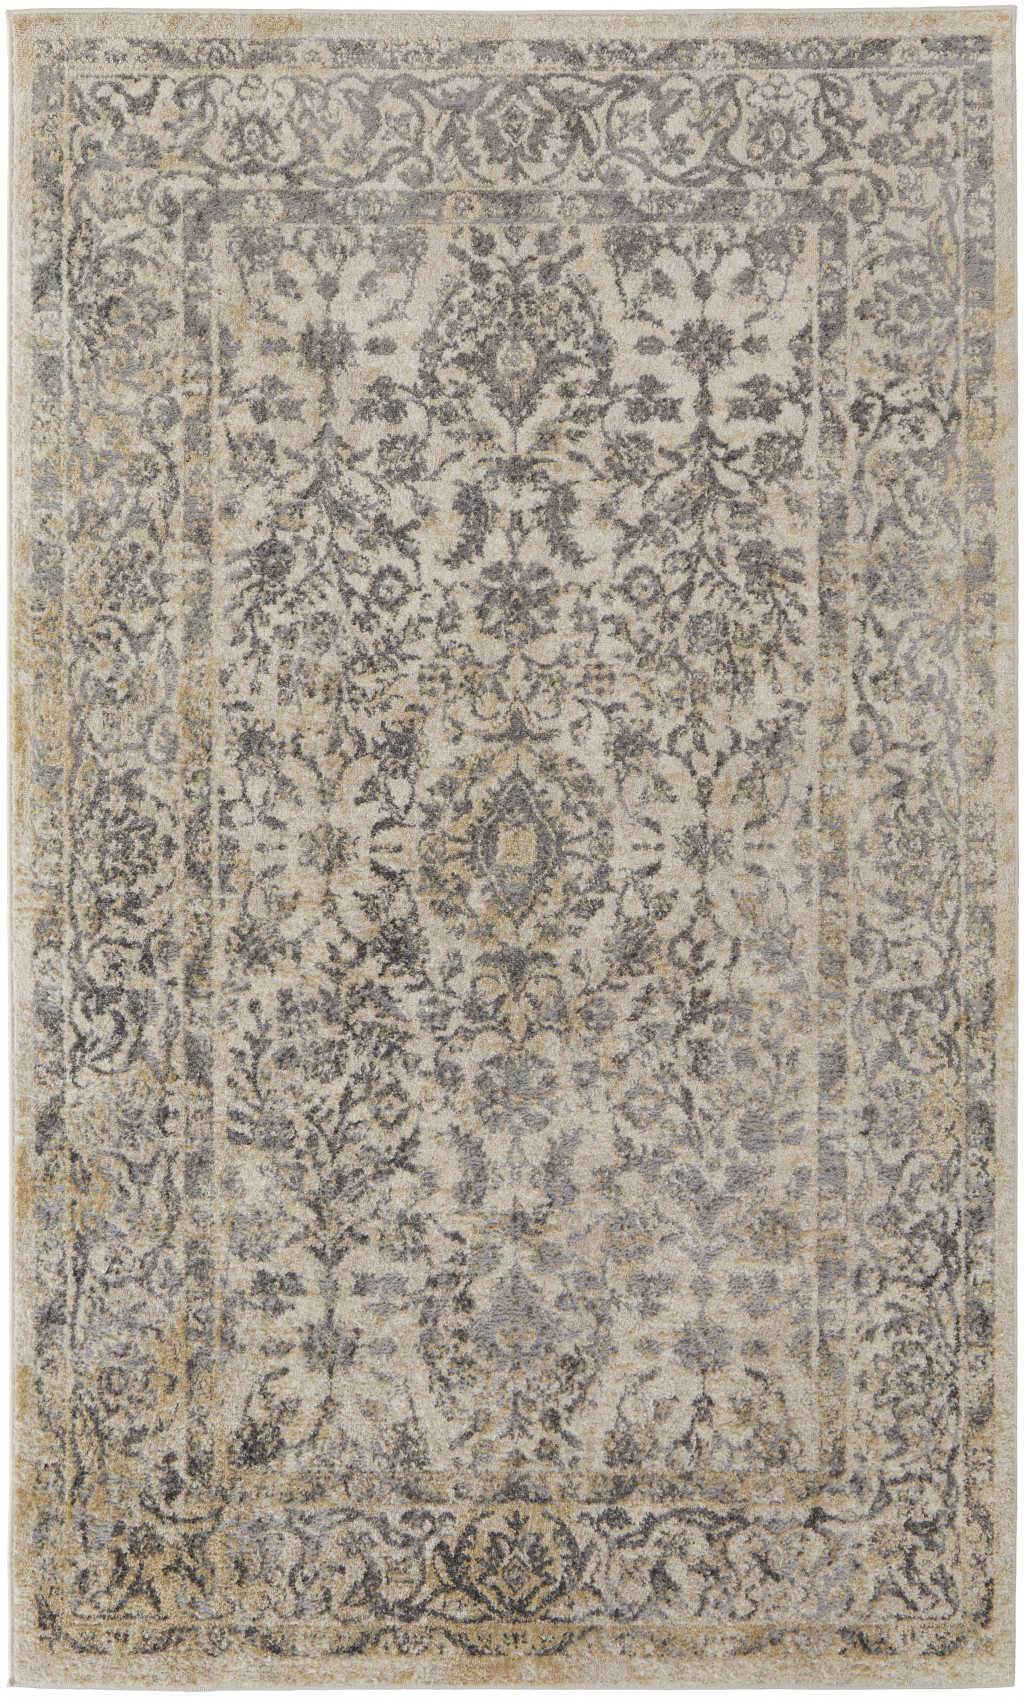 8' X 10' Gray And Ivory Floral Power Loom Distressed Area Rug-513319-1